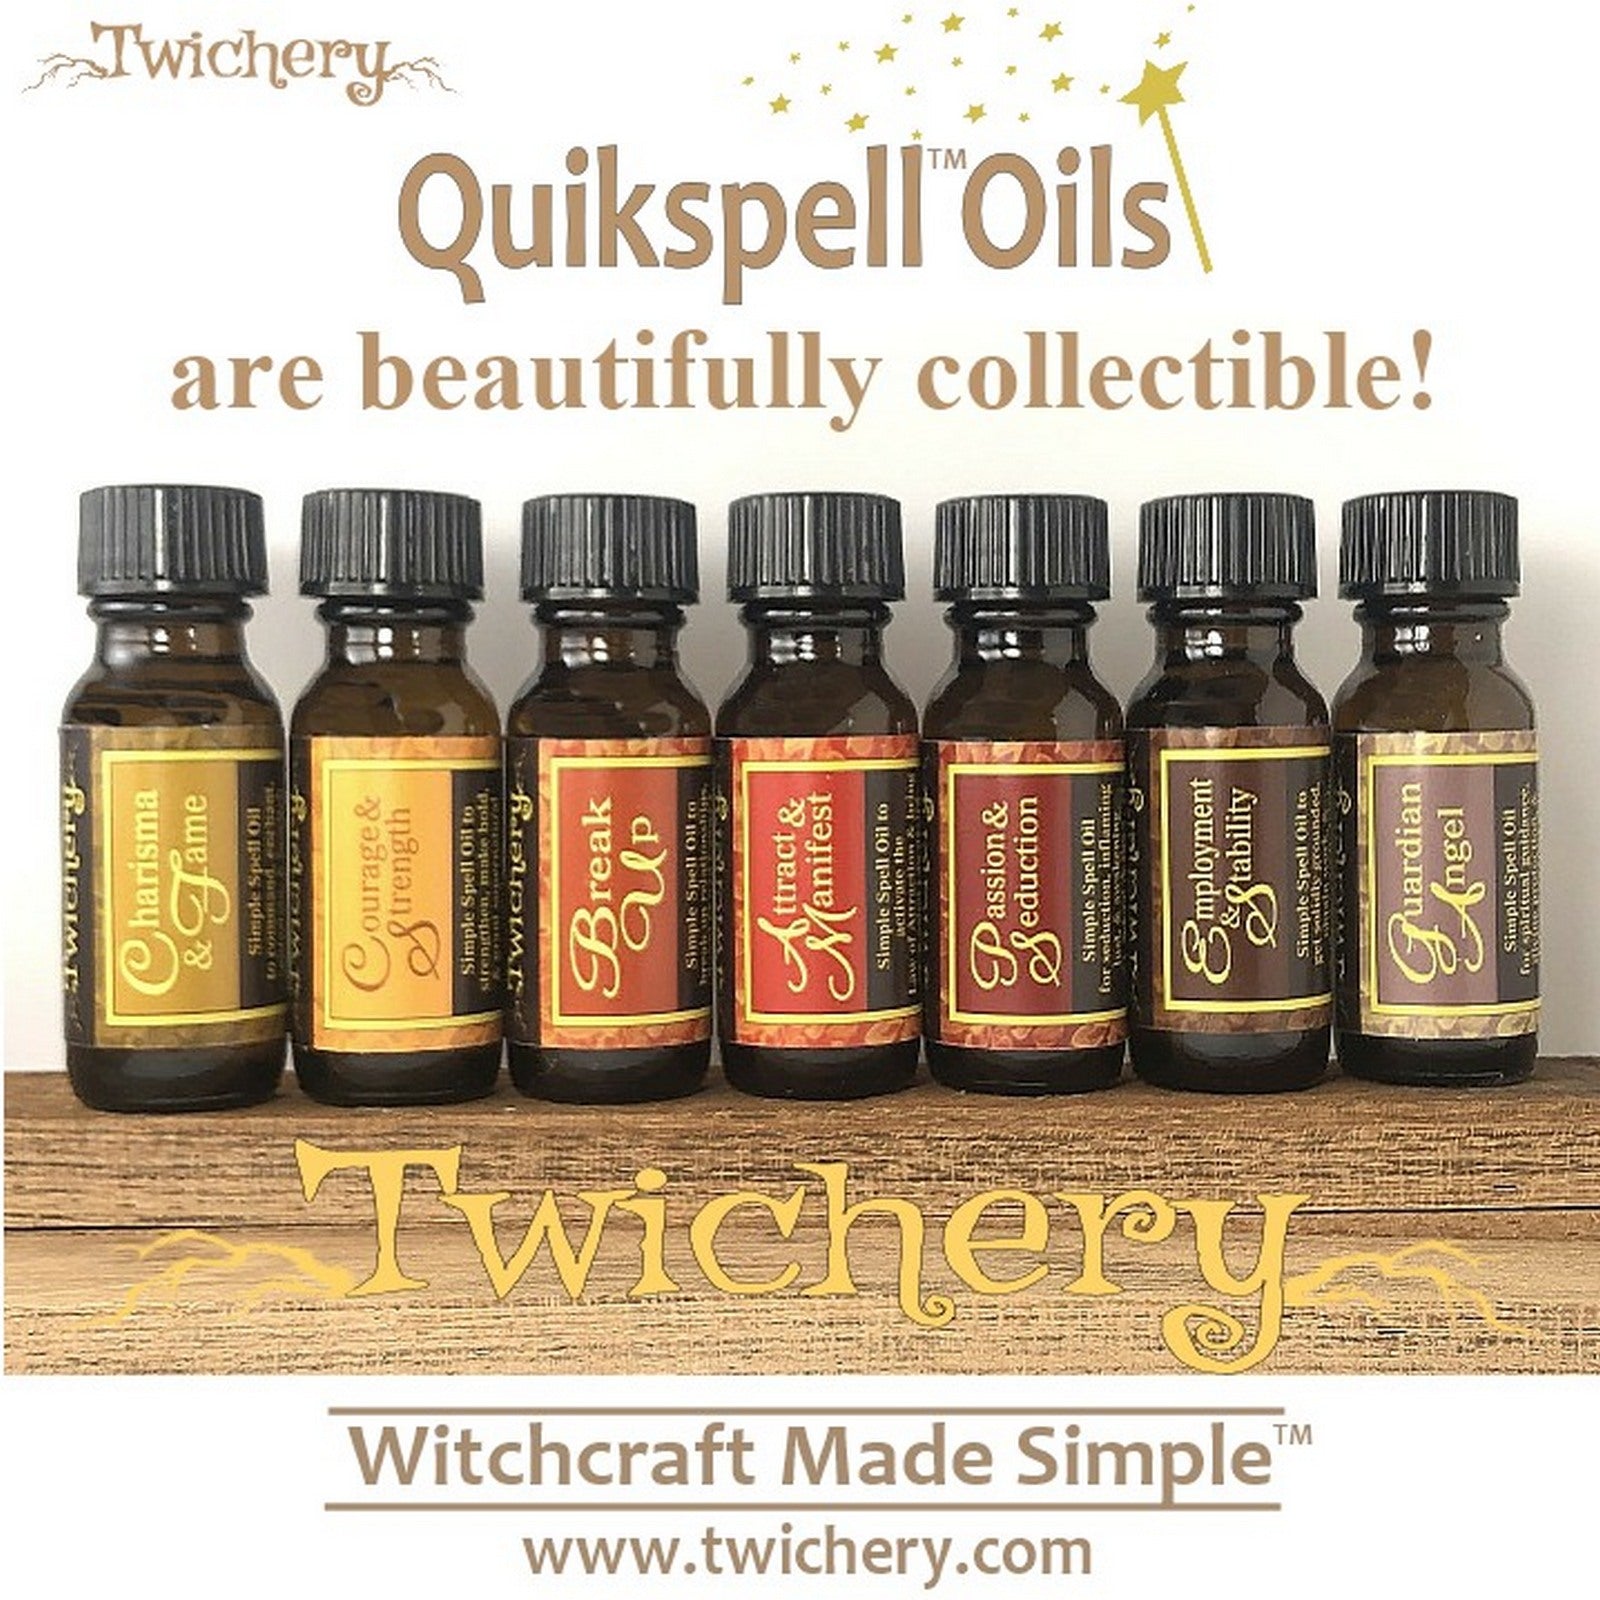 Collect all 24 Twichery Quikspell Oils for all your magickal needs, including major mojo boosting! Hoodoo, Voodoo, Wicca, Witchcraft Made Simple